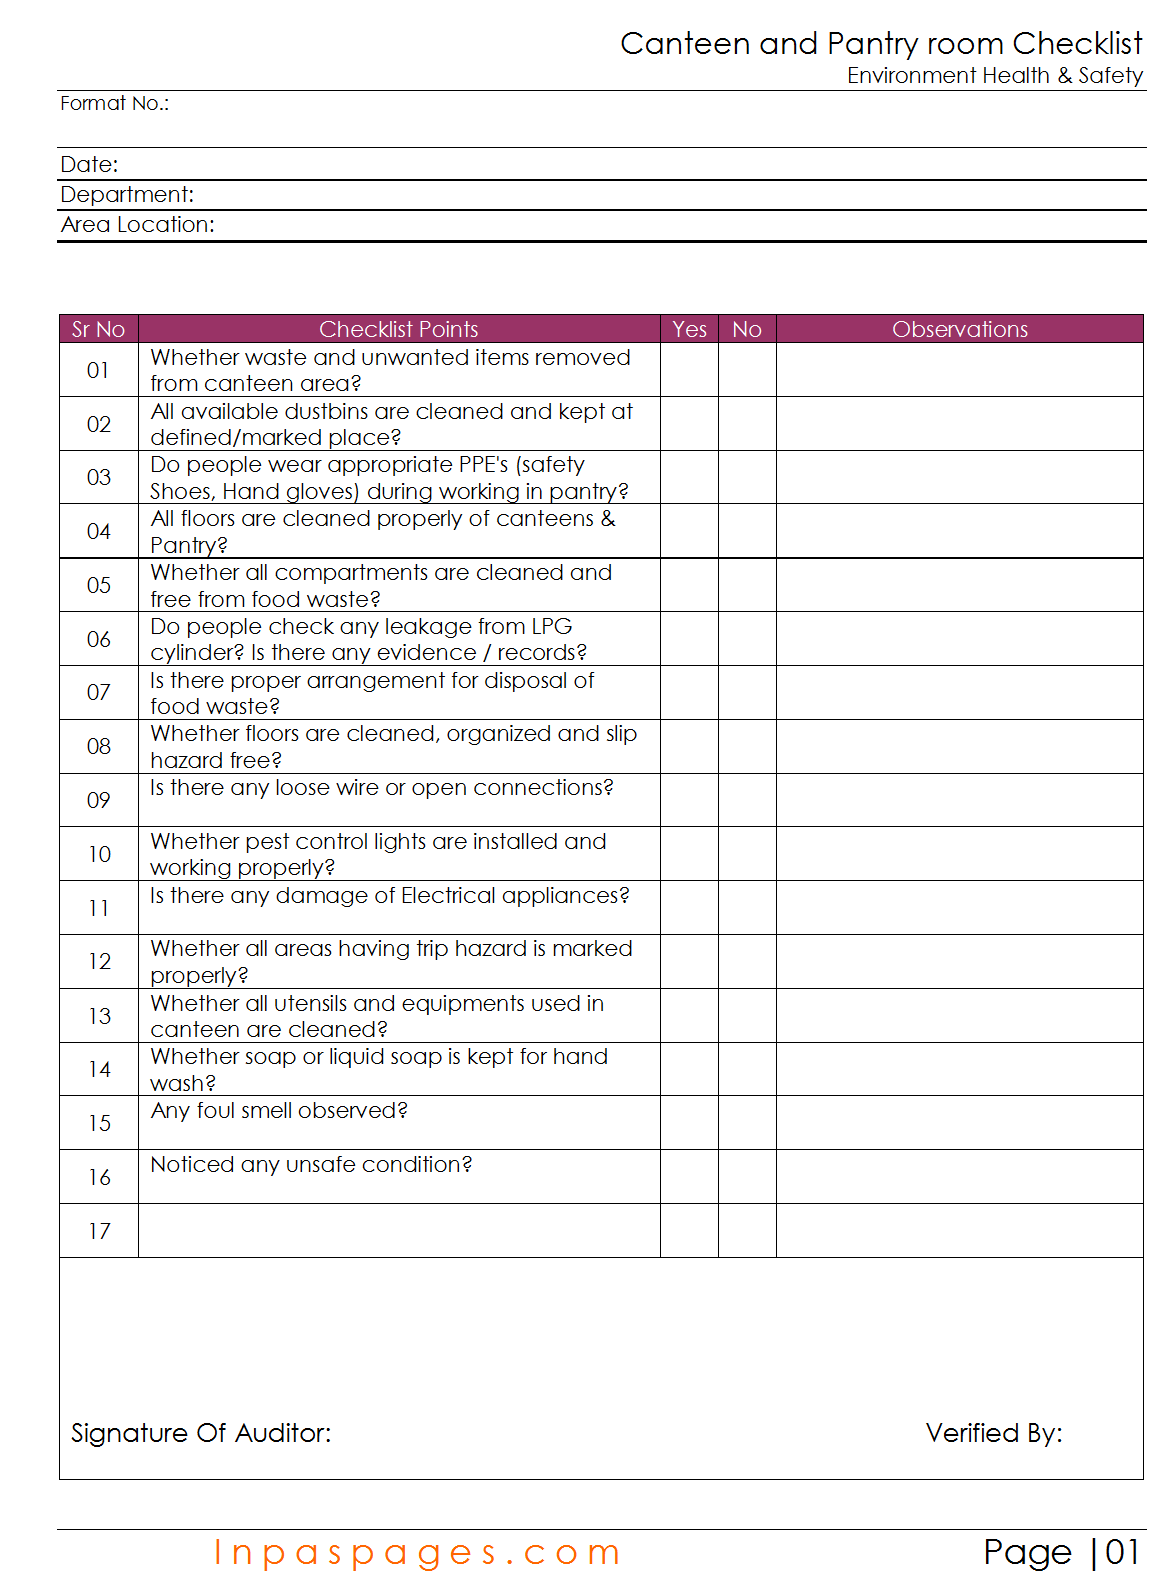 Canteen and Pantry Room checklist Within Food Safety Inspection Checklist Template Regarding Food Safety Inspection Checklist Template